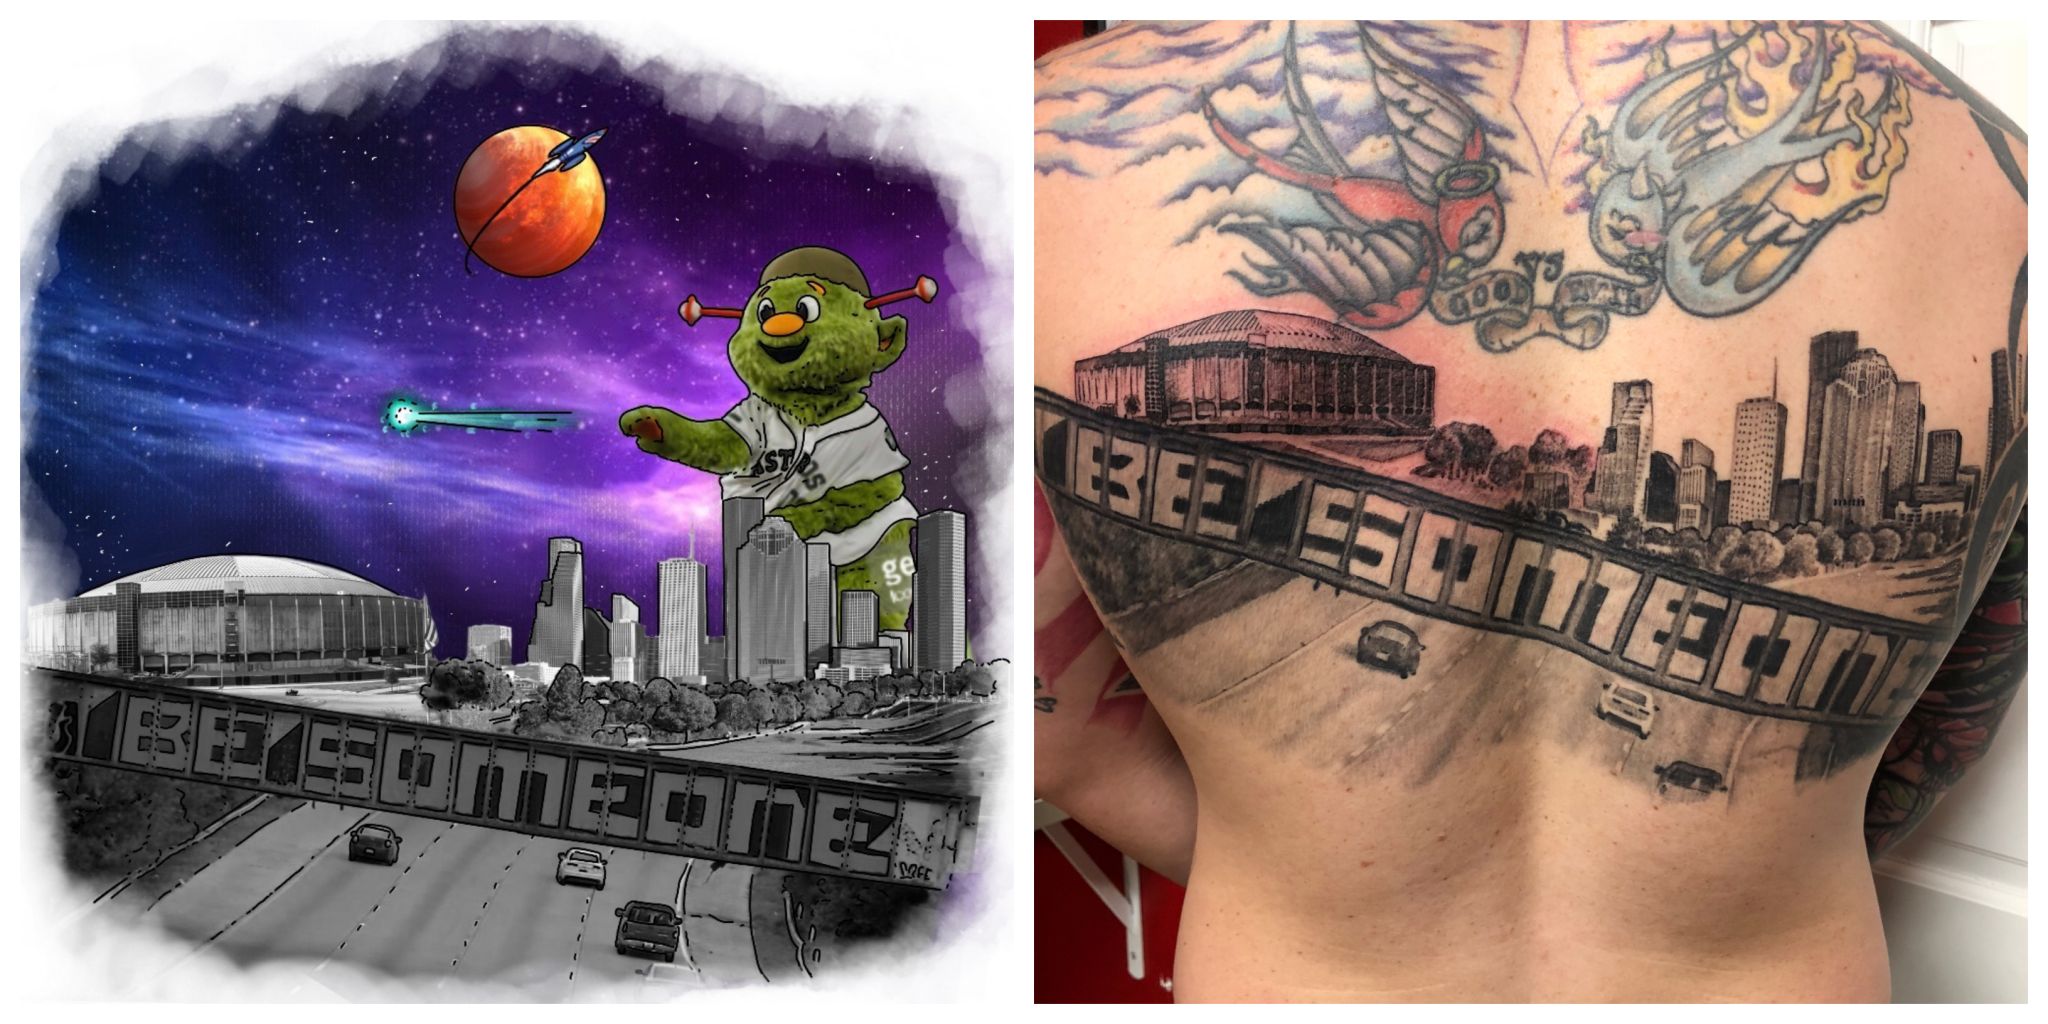 Houston man gets the most Houston tattoo ever